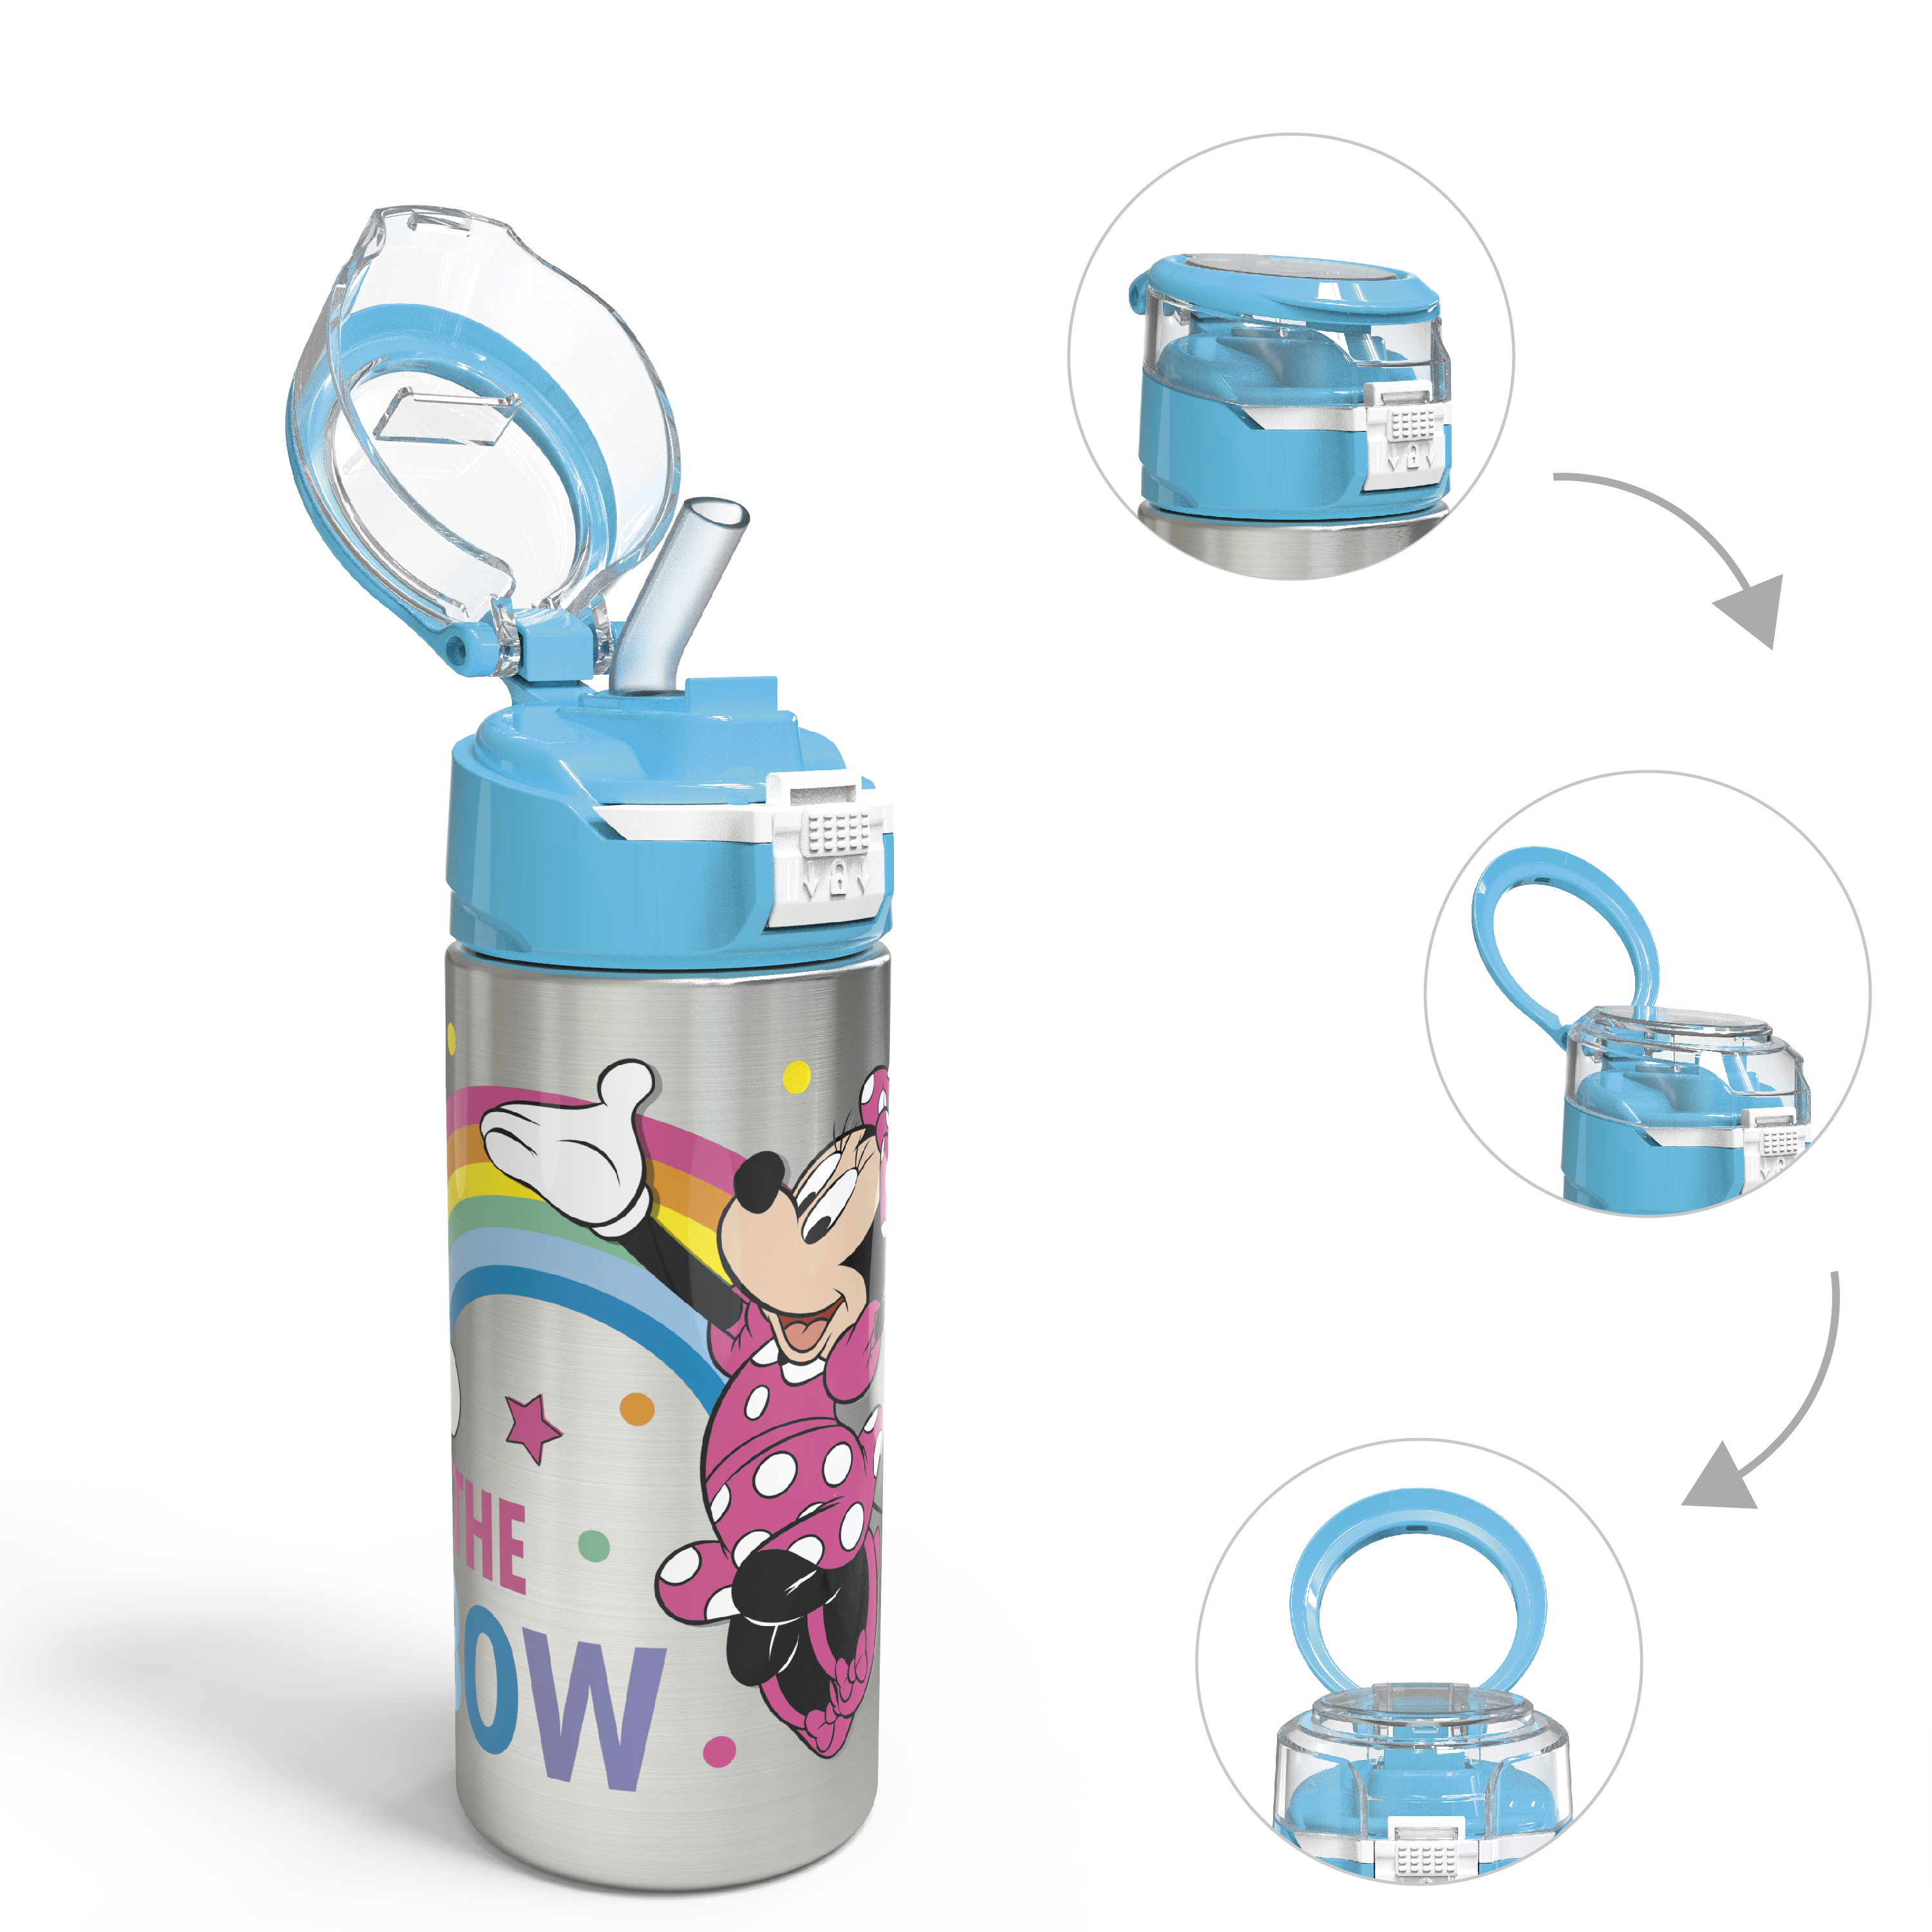 Disney 19.5 ounce Stainless Steel Water Bottle with Straw, Minnie Mouse slideshow image 1